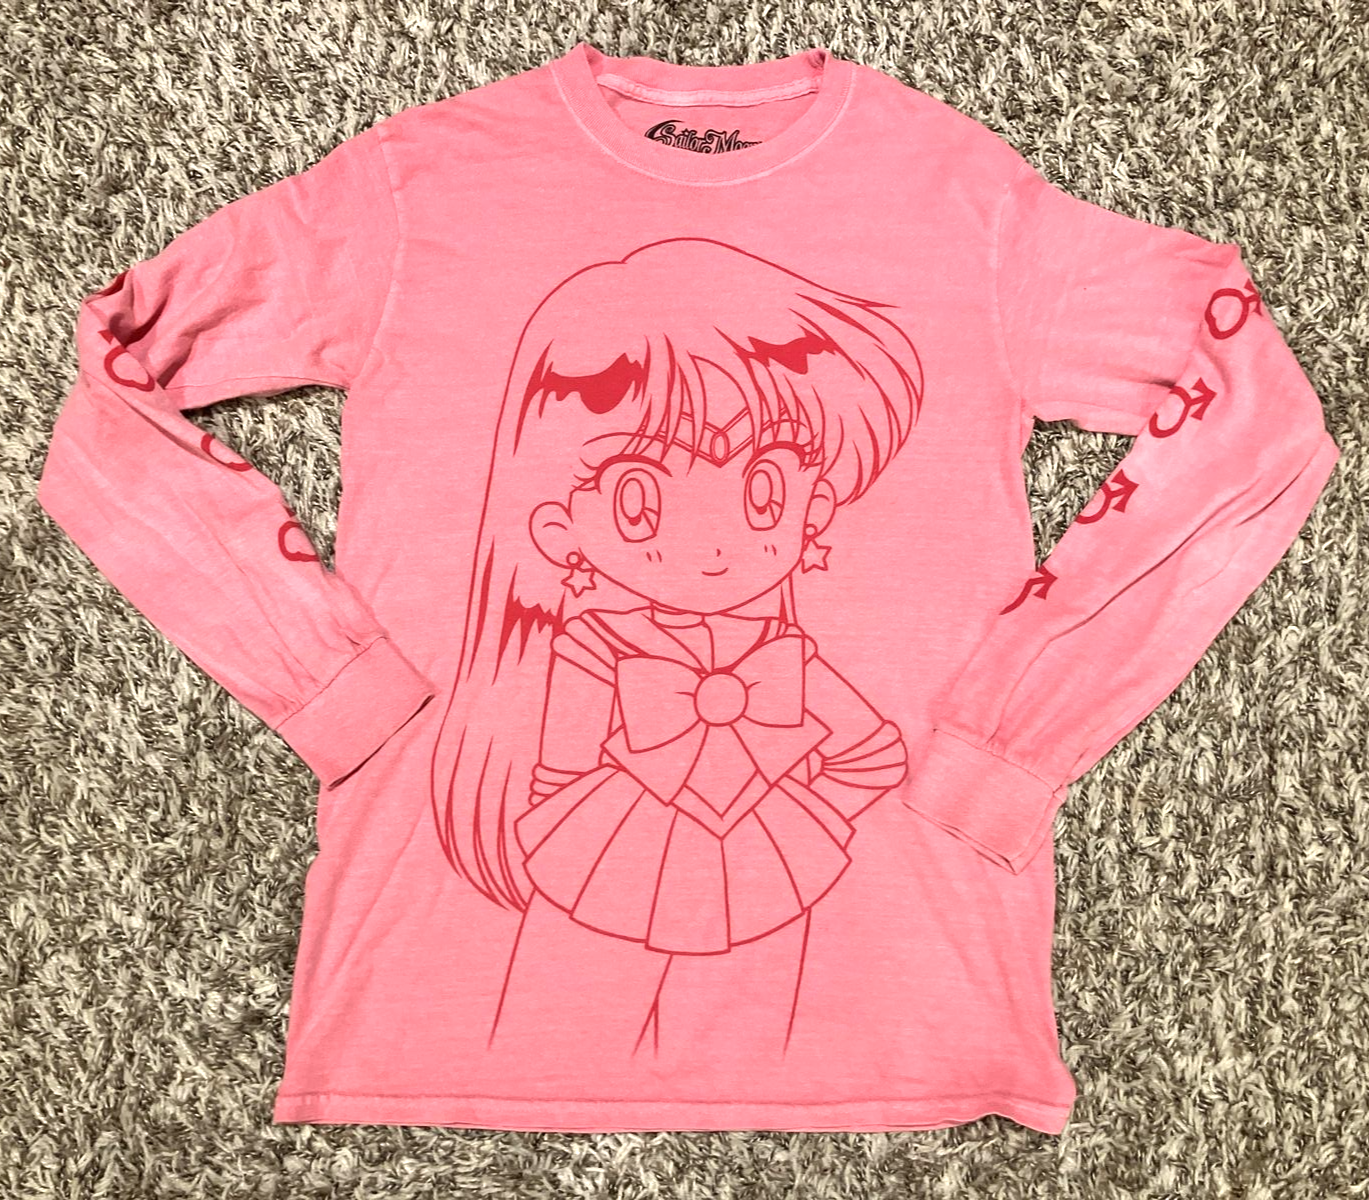 Primary image for Sailor Moon T Shirt Adult Small Pink Long Sleeve Graphic Faded 17 inch x 29 inch